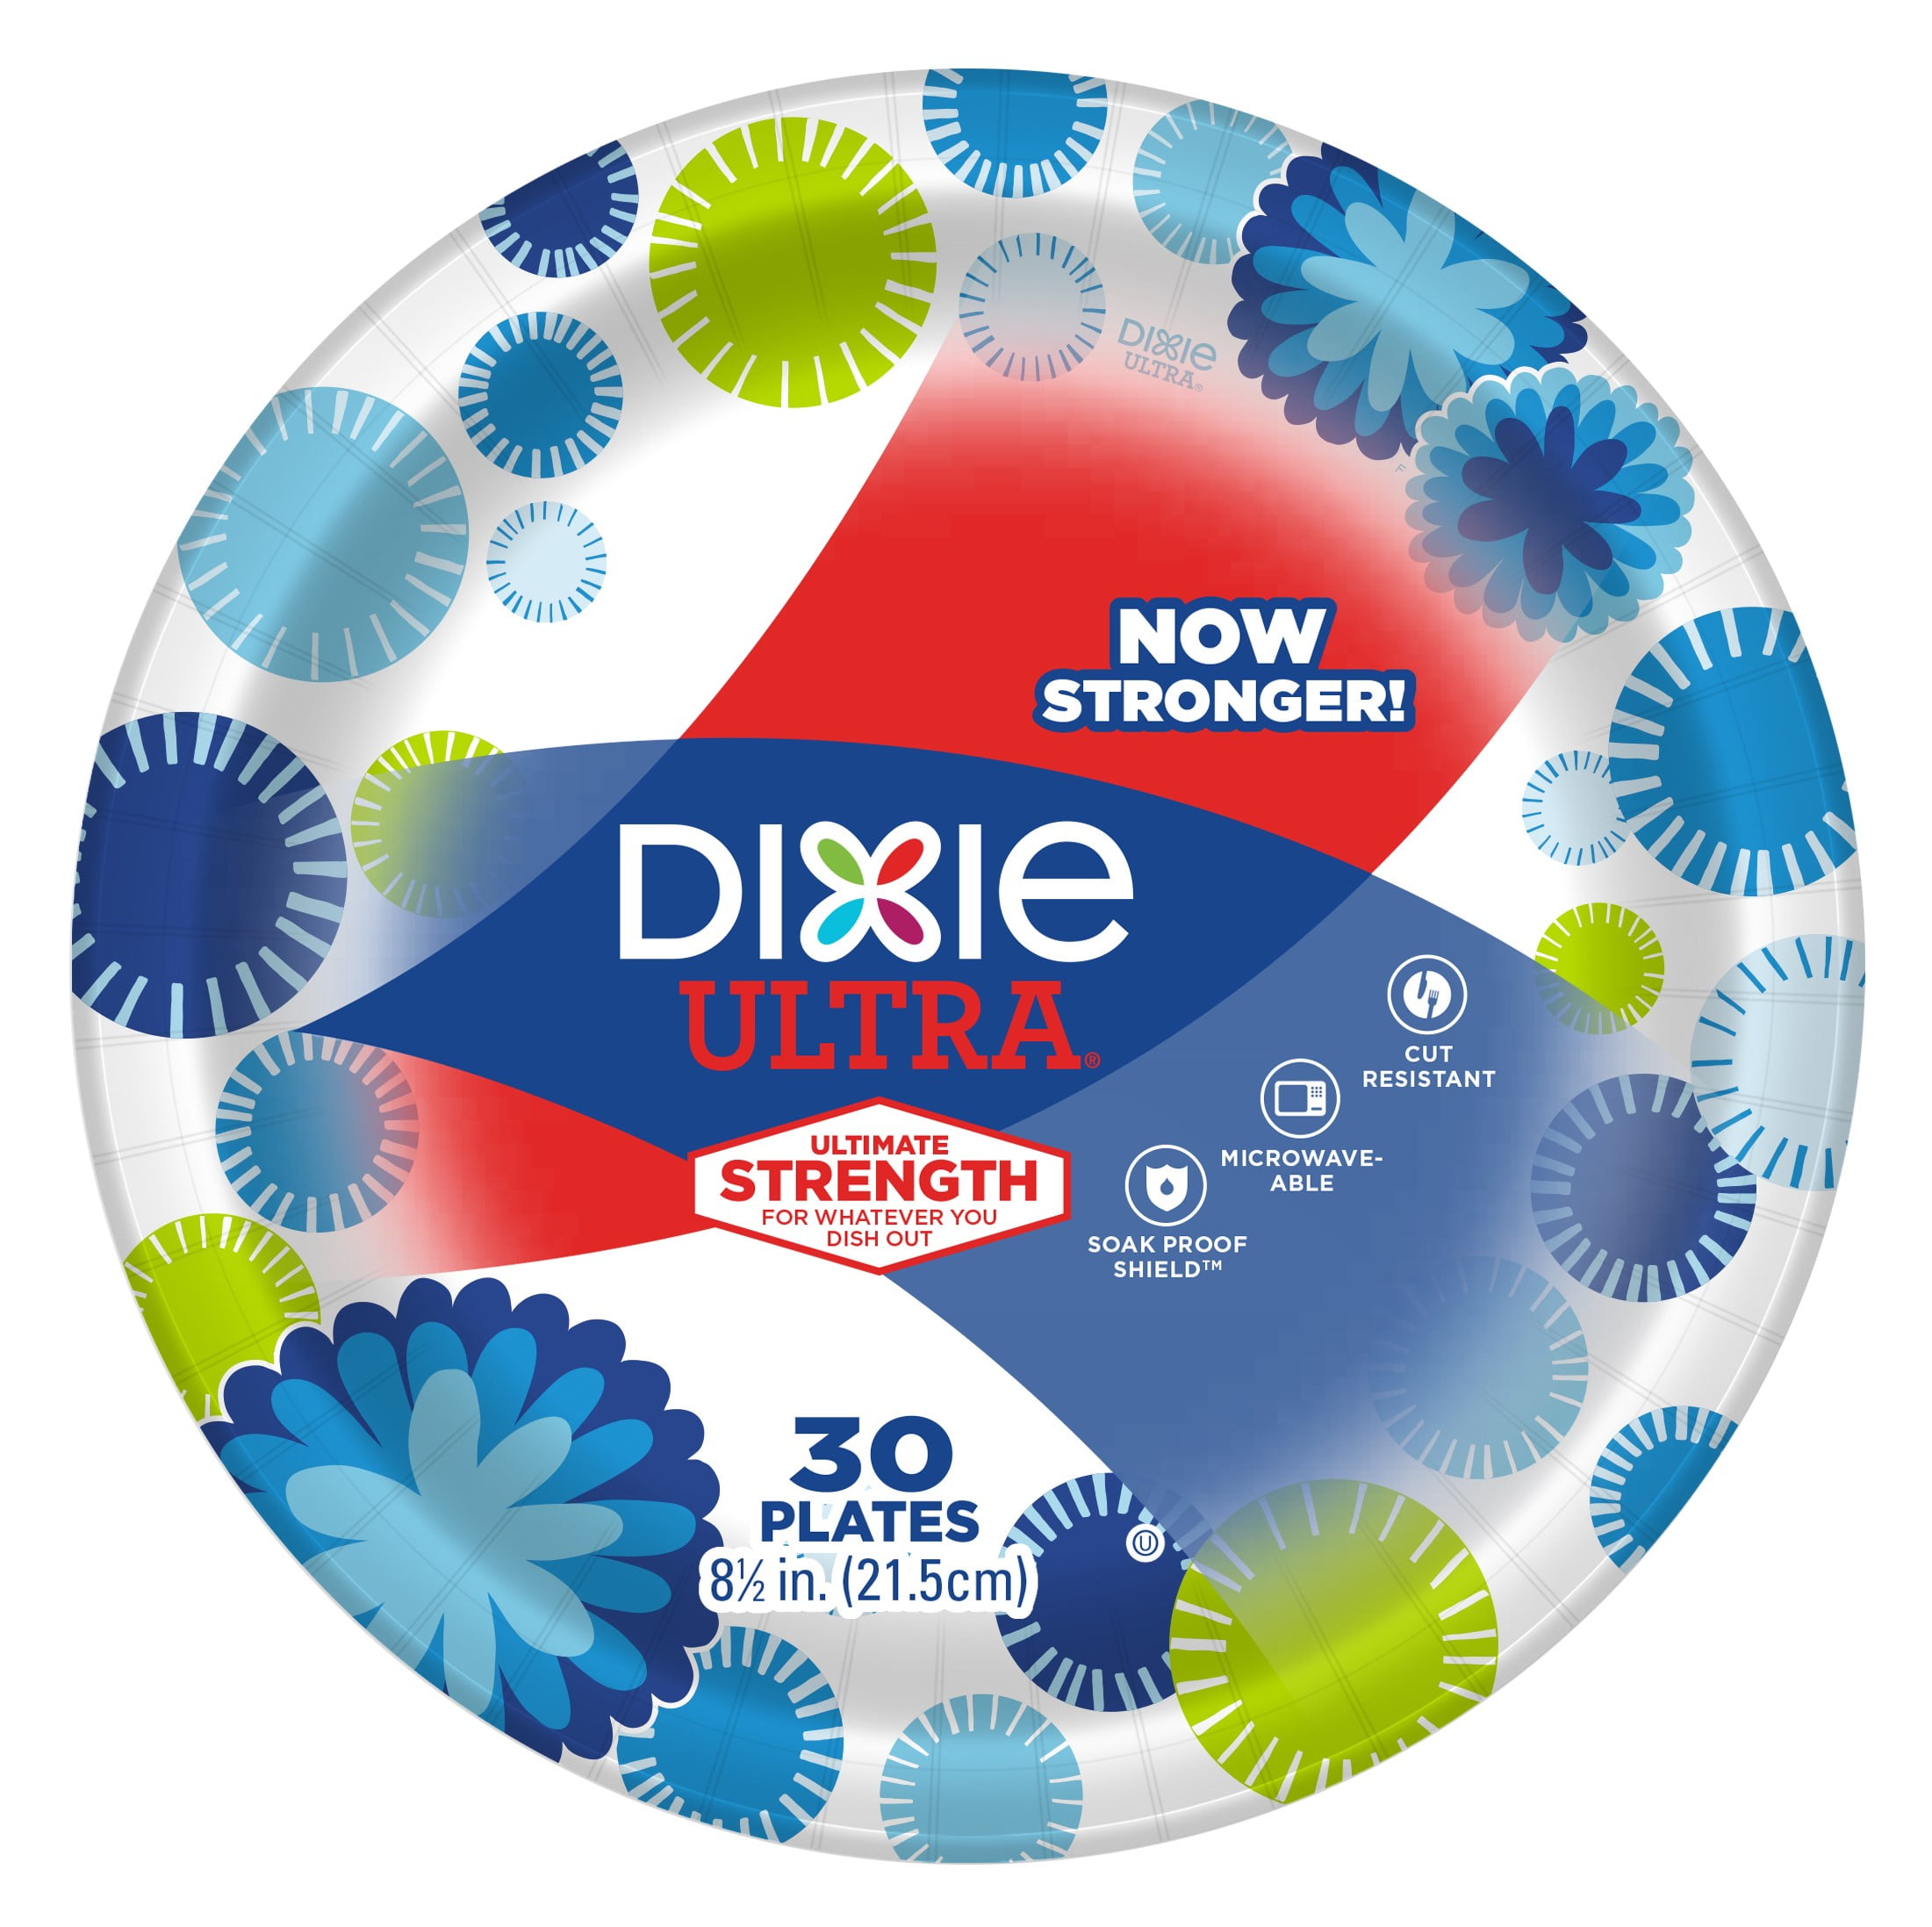  Dixie Ultra Disposable Paper Plates, 8 ½ inch, Lunch or Light  Dinner Size Printed Disposable Plates, 300 count (10 Packs of 30 Plates),  Packaging and Design May Vary : Health & Household